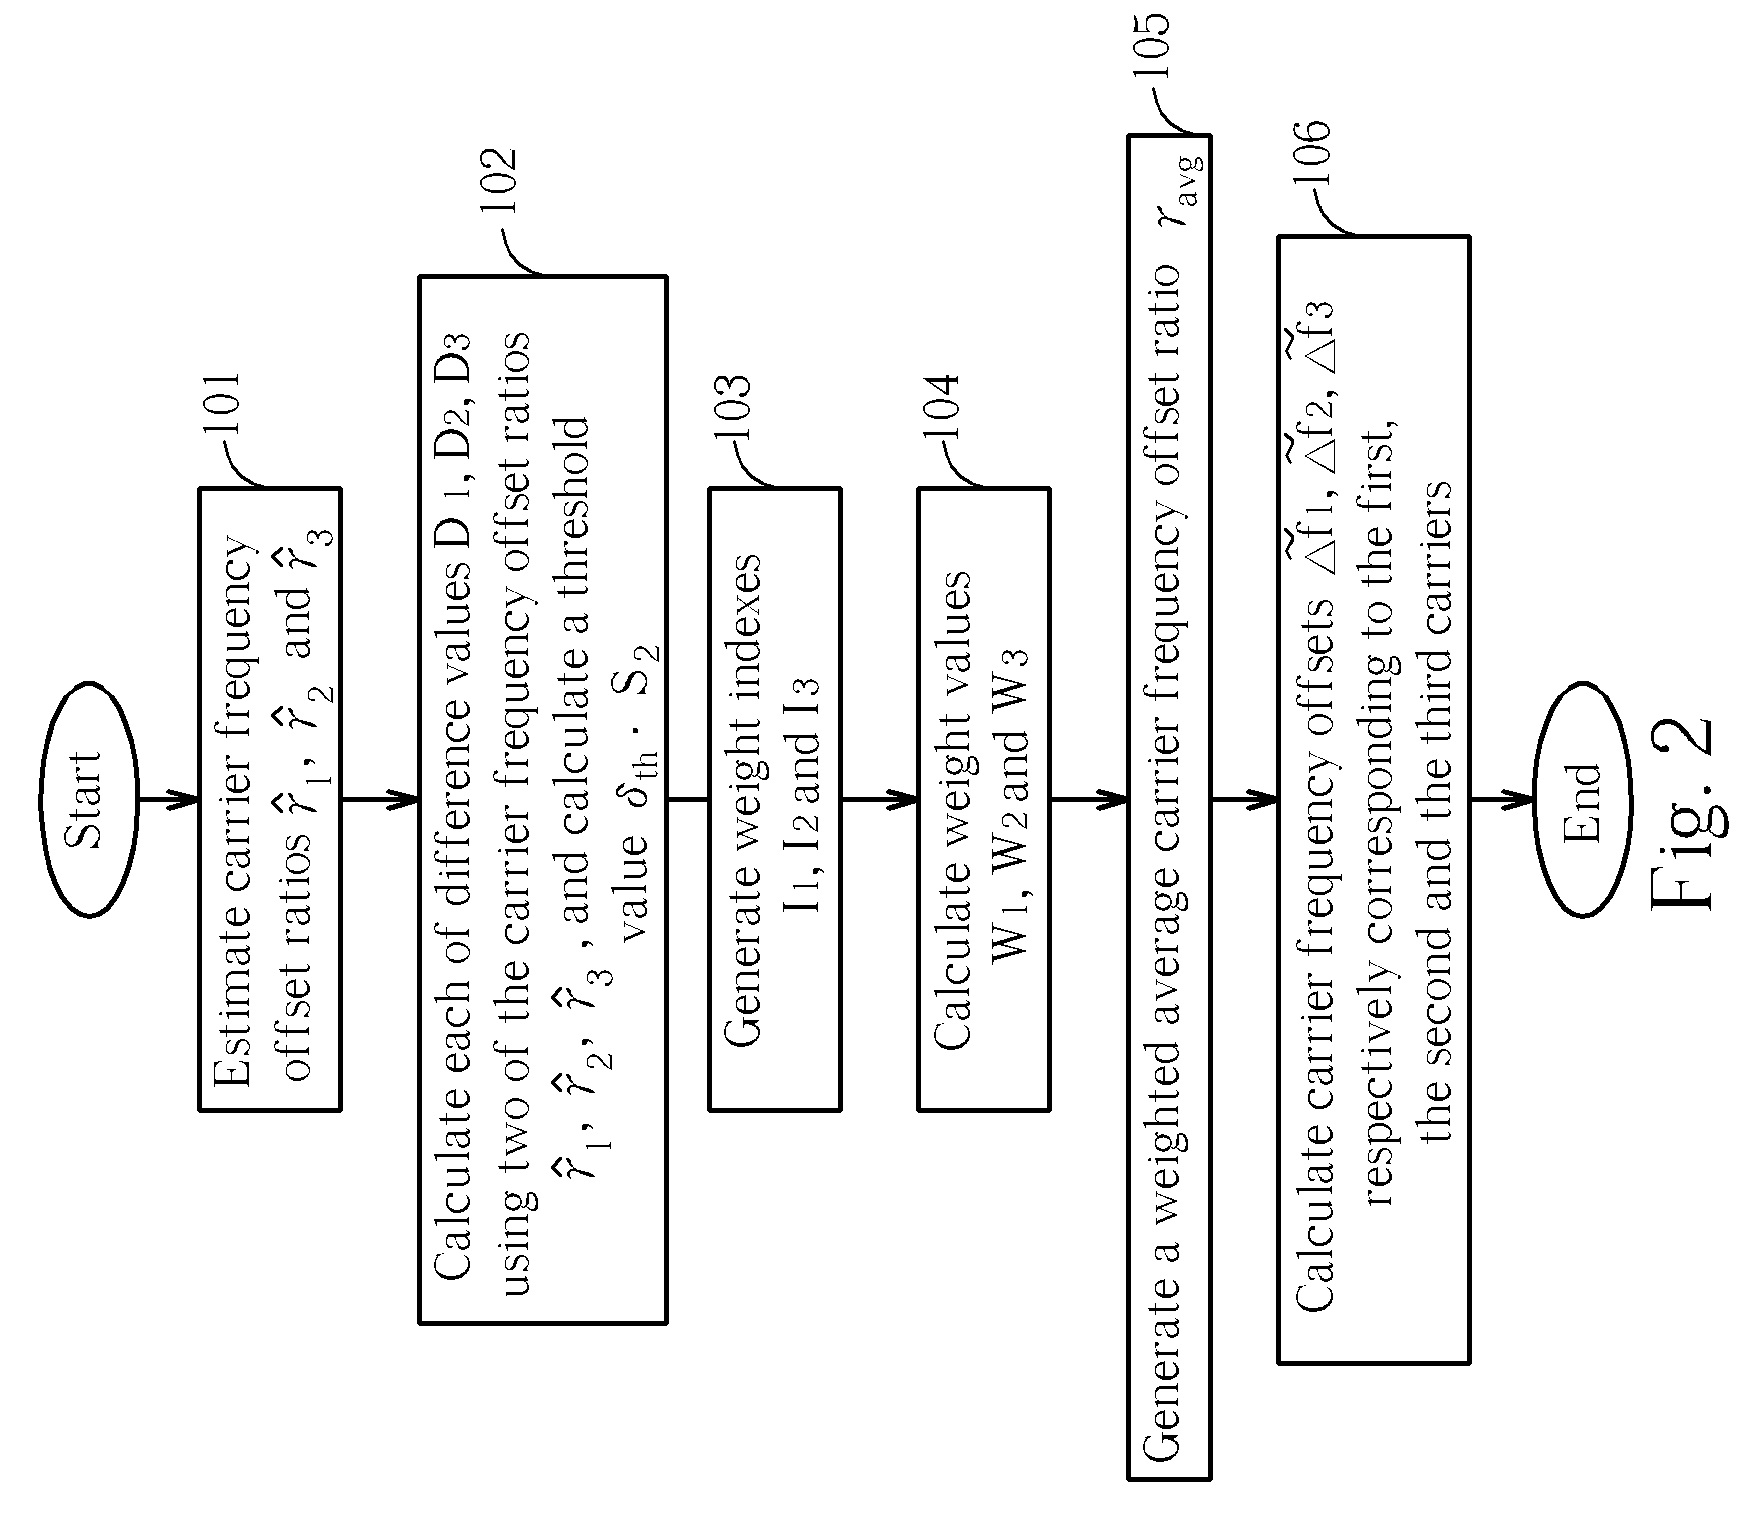 Band averaging circuit and related method for carrier frequency offset estimation in a multi-band multi-carrier communication system